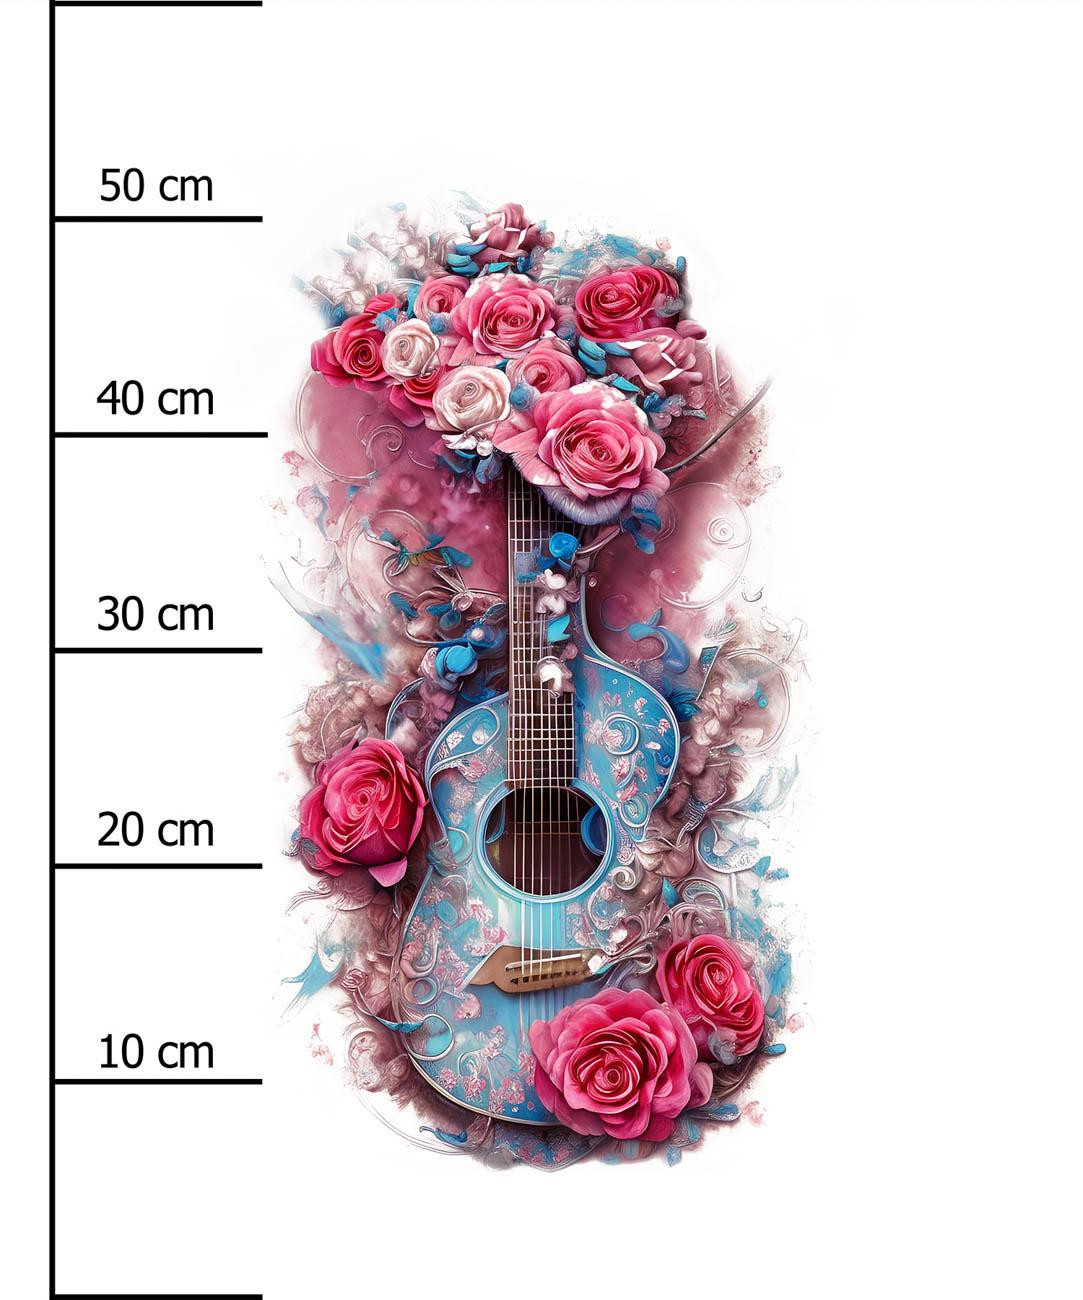 GUITAR WITH ROSES - panel (60cm x 50cm) Hydrophobic brushed knit